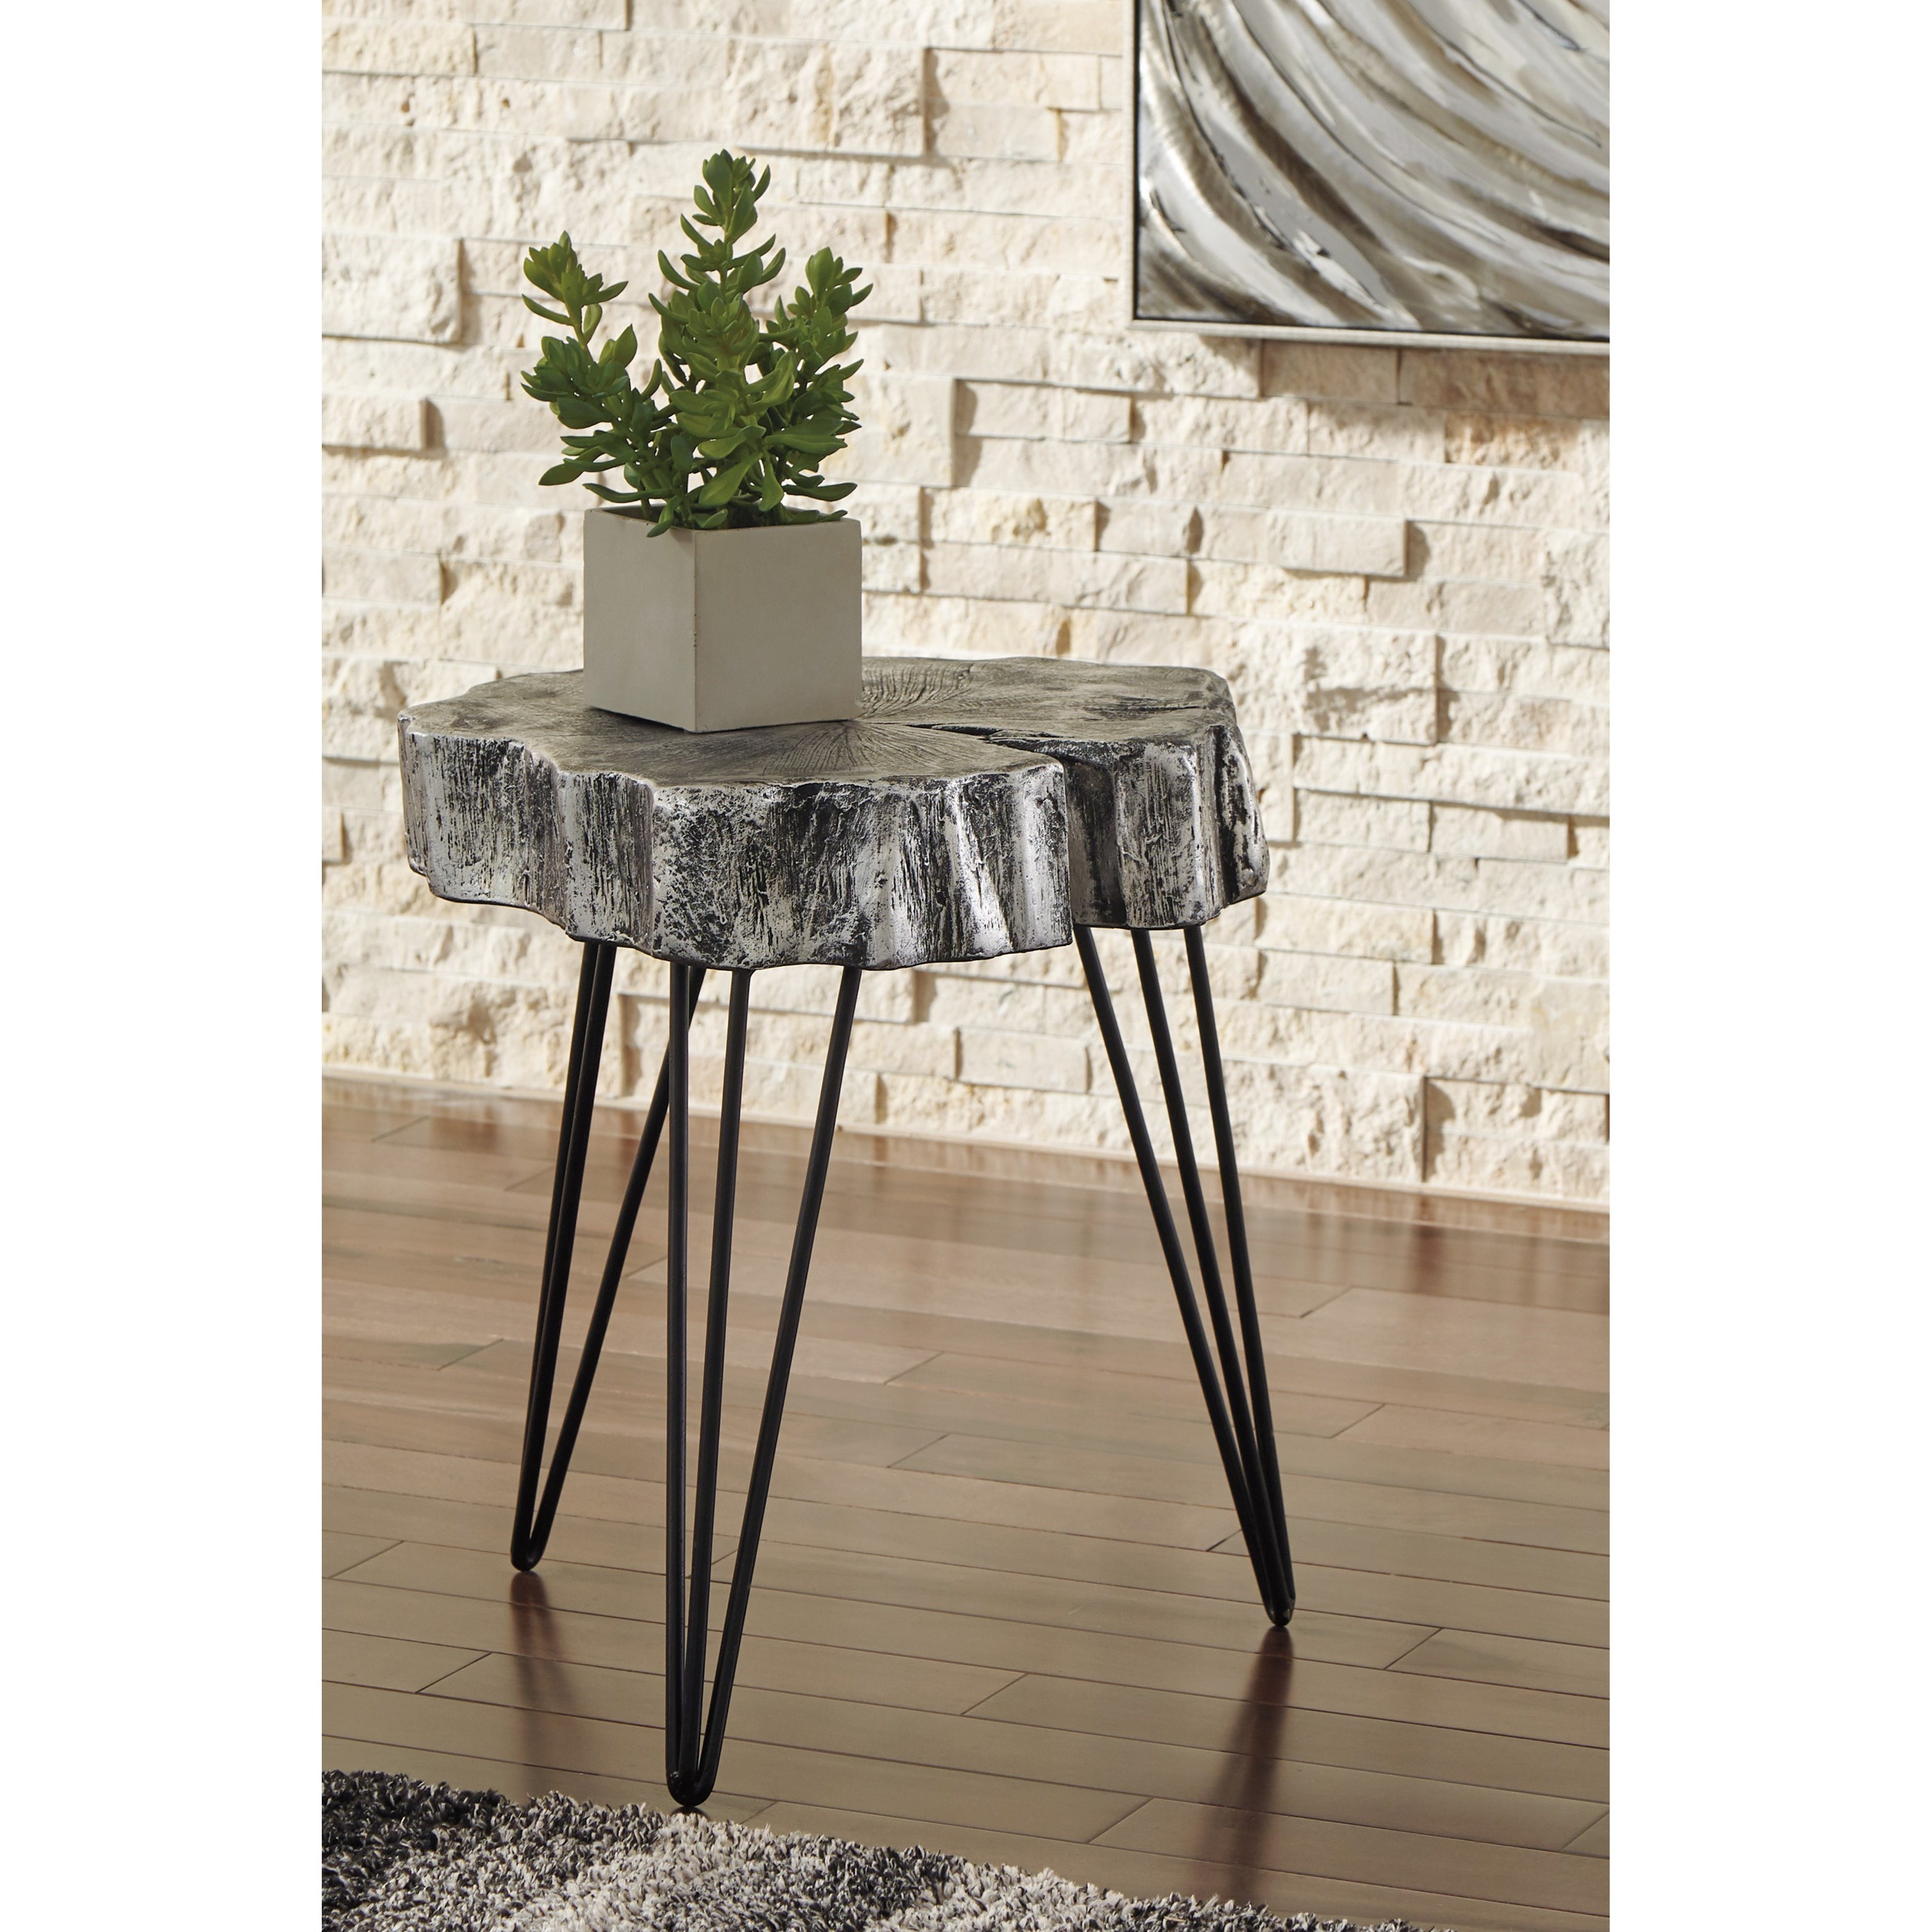 antique silver finish wood stump style accent table with hairpin products signature design ashley color dellman leg legs black iron circular industrial small chest cabinet ethan